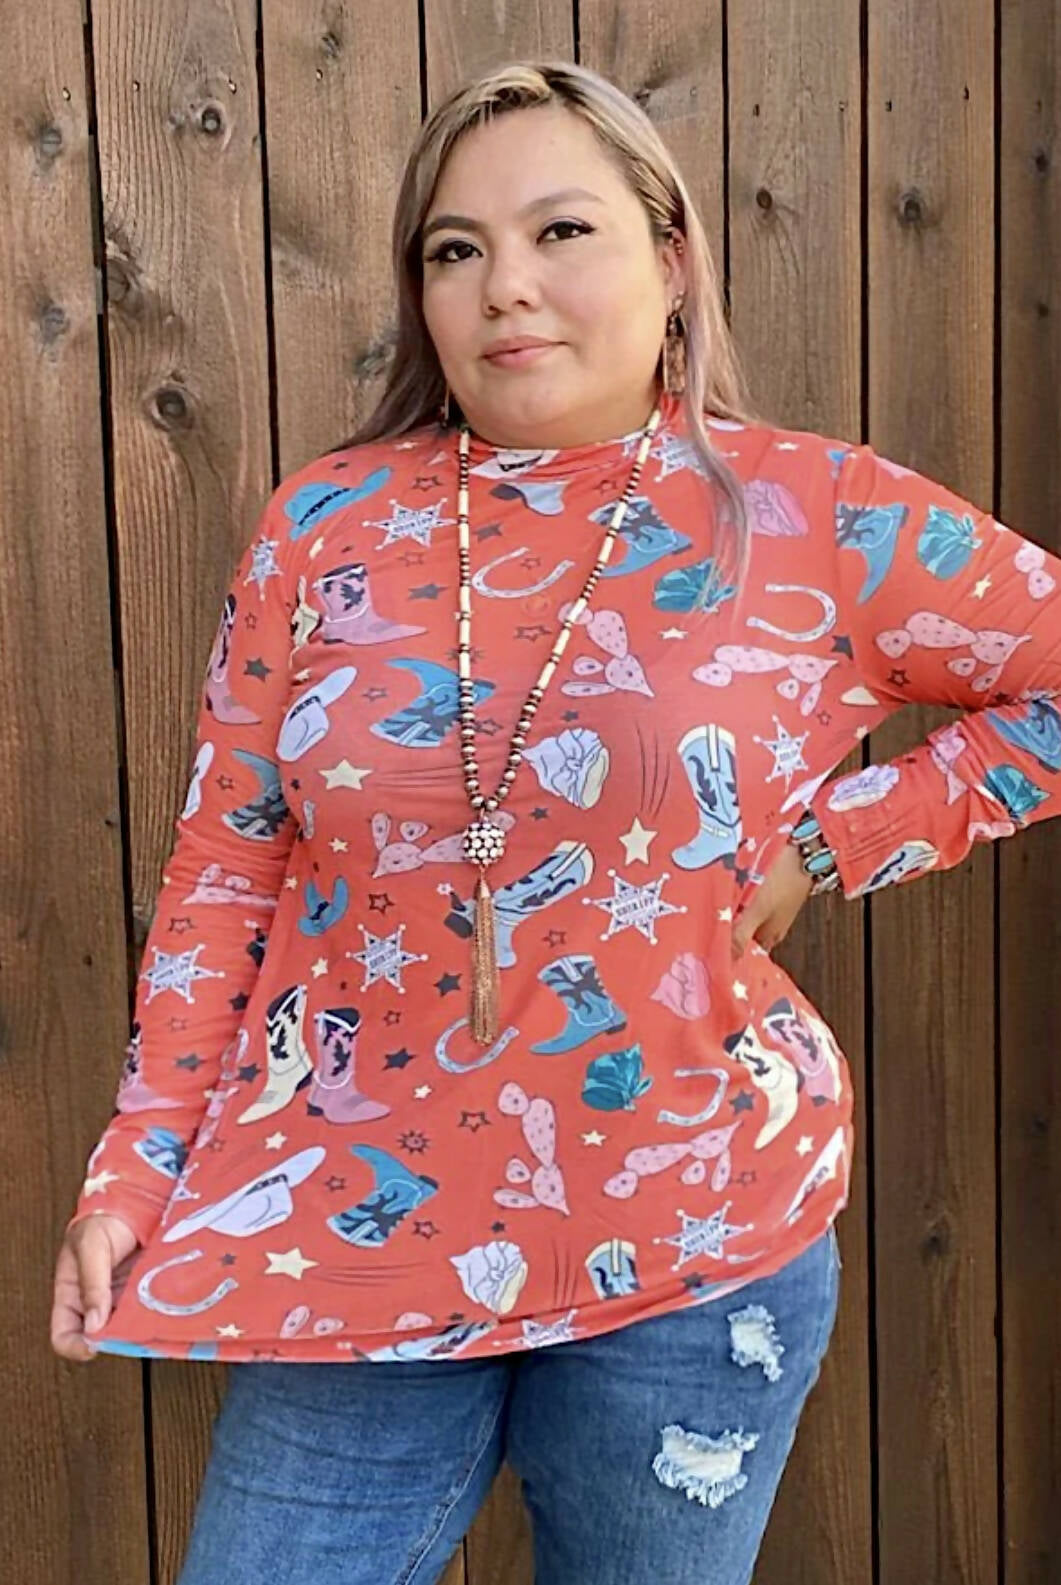 Cowboy Way Sheer Shirt-Graphic Tees-Vintage Cowgirl-Deadwood South Boutique, Women's Fashion Boutique in Henderson, TX